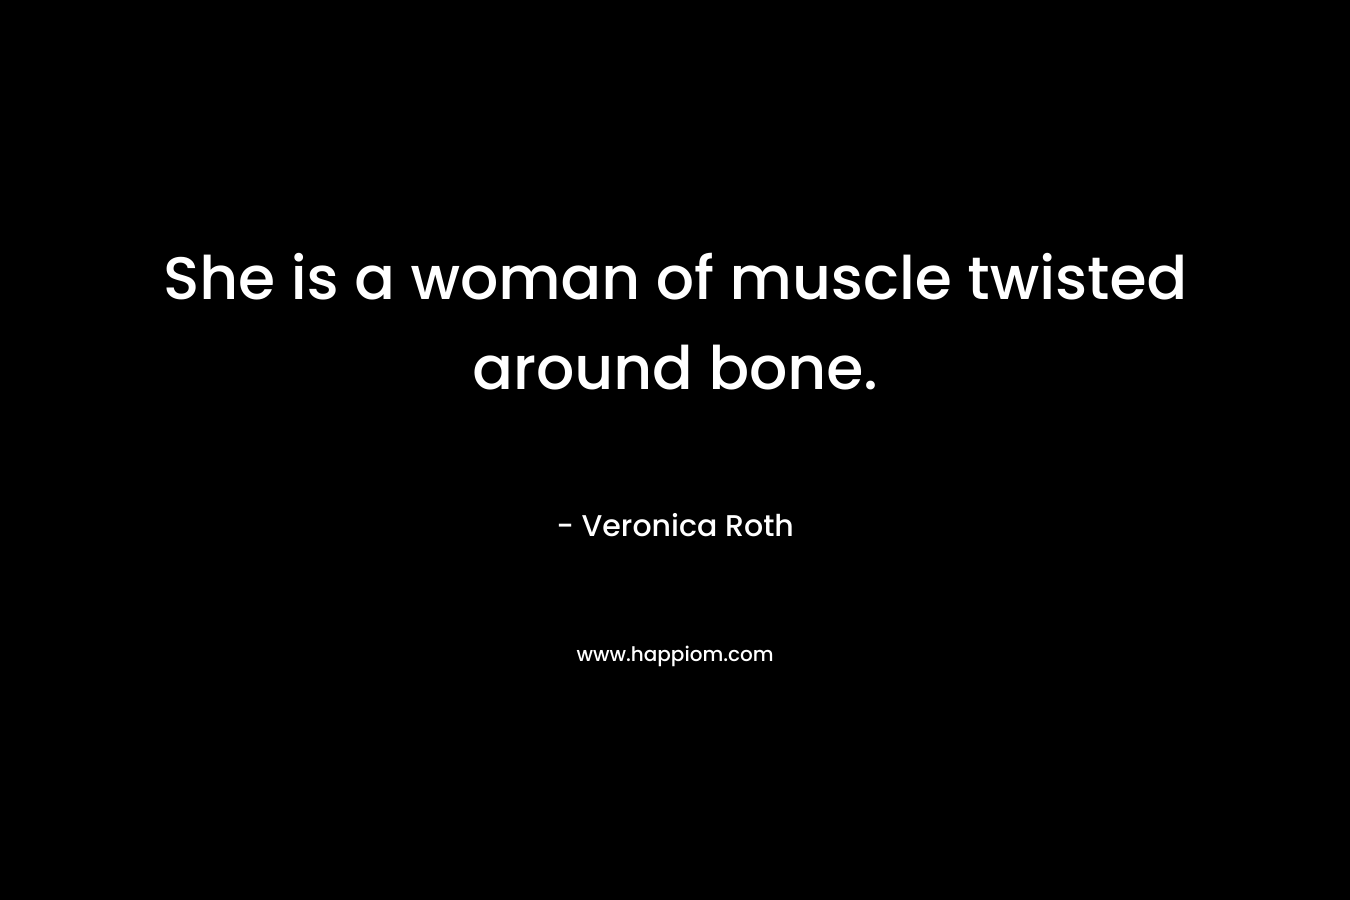 She is a woman of muscle twisted around bone. – Veronica Roth